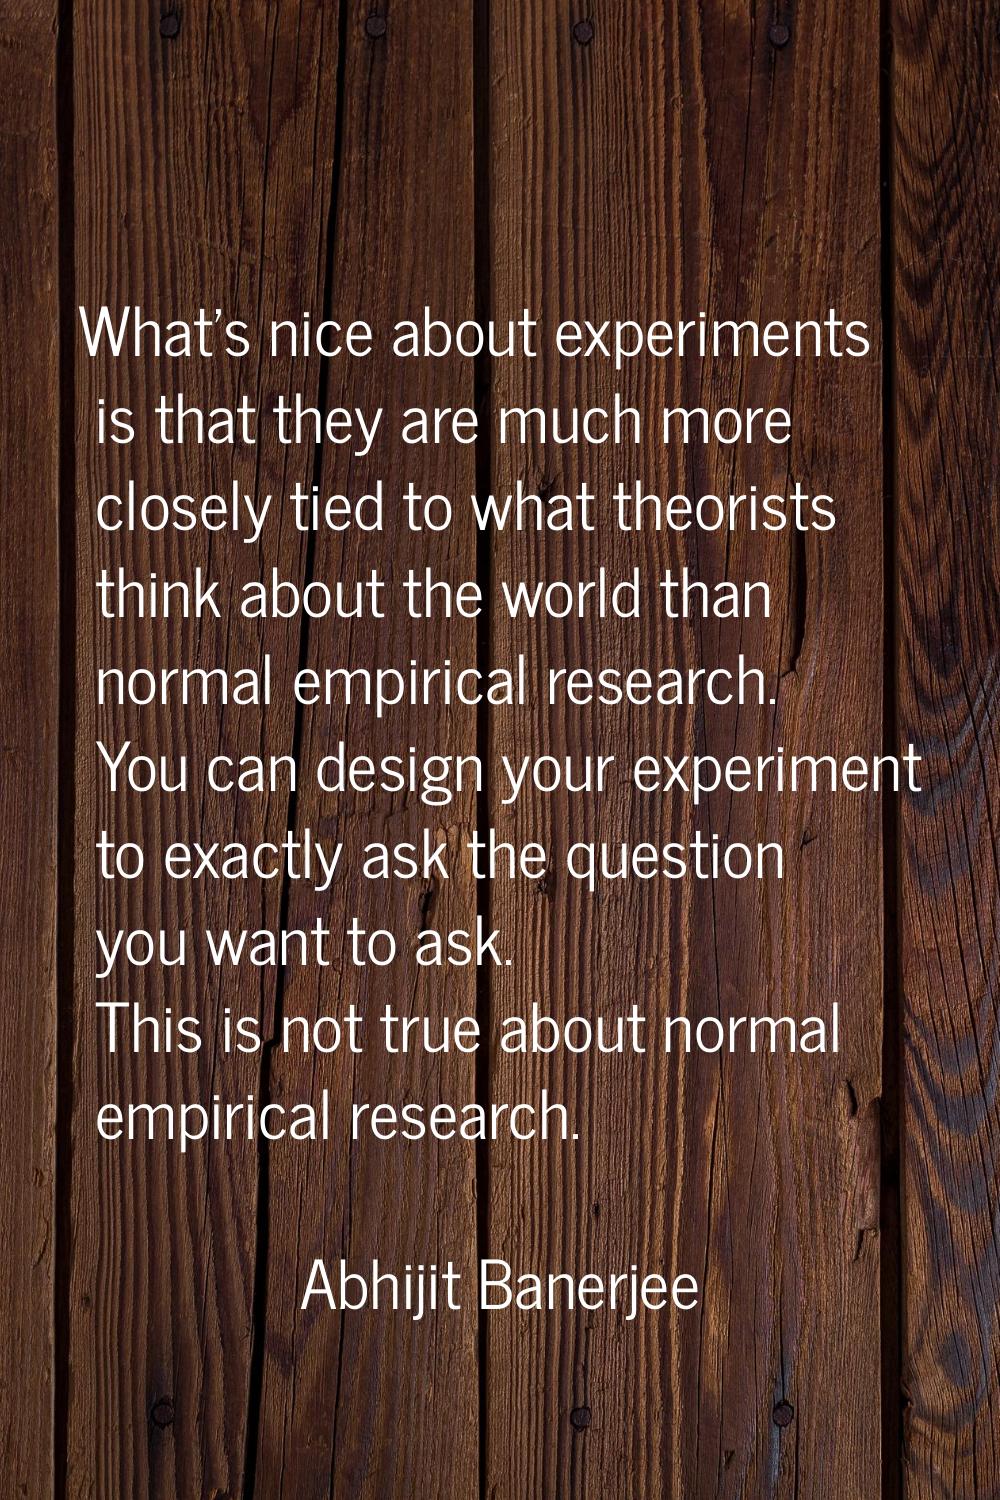 What's nice about experiments is that they are much more closely tied to what theorists think about